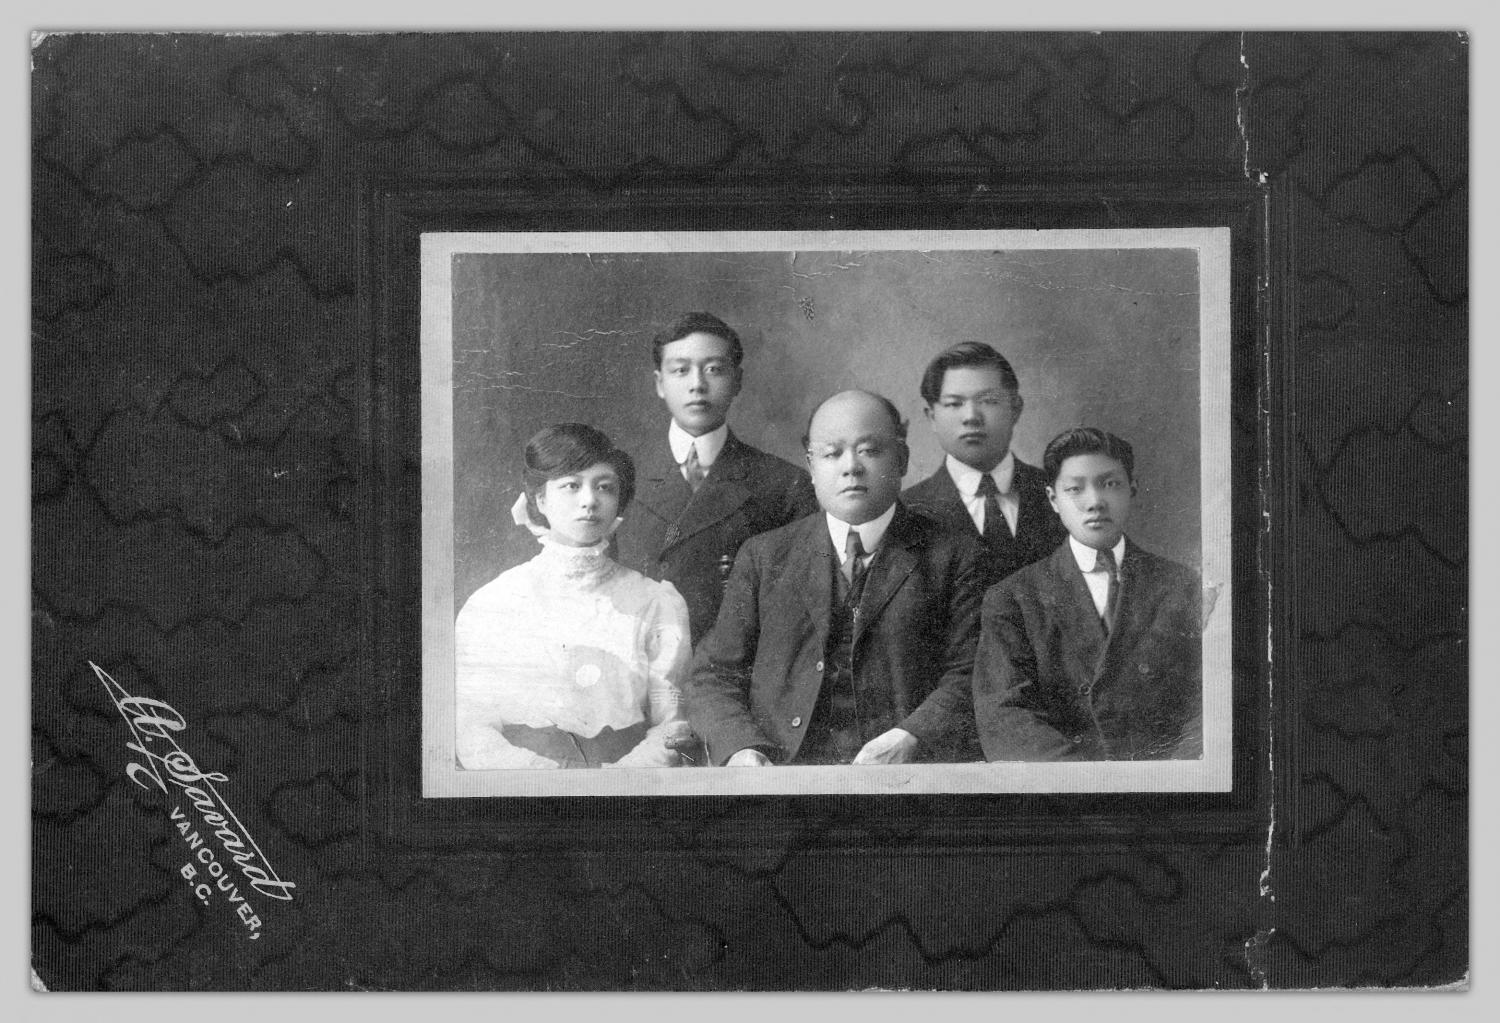 Yip Sang seated alongside what appear to be his children.